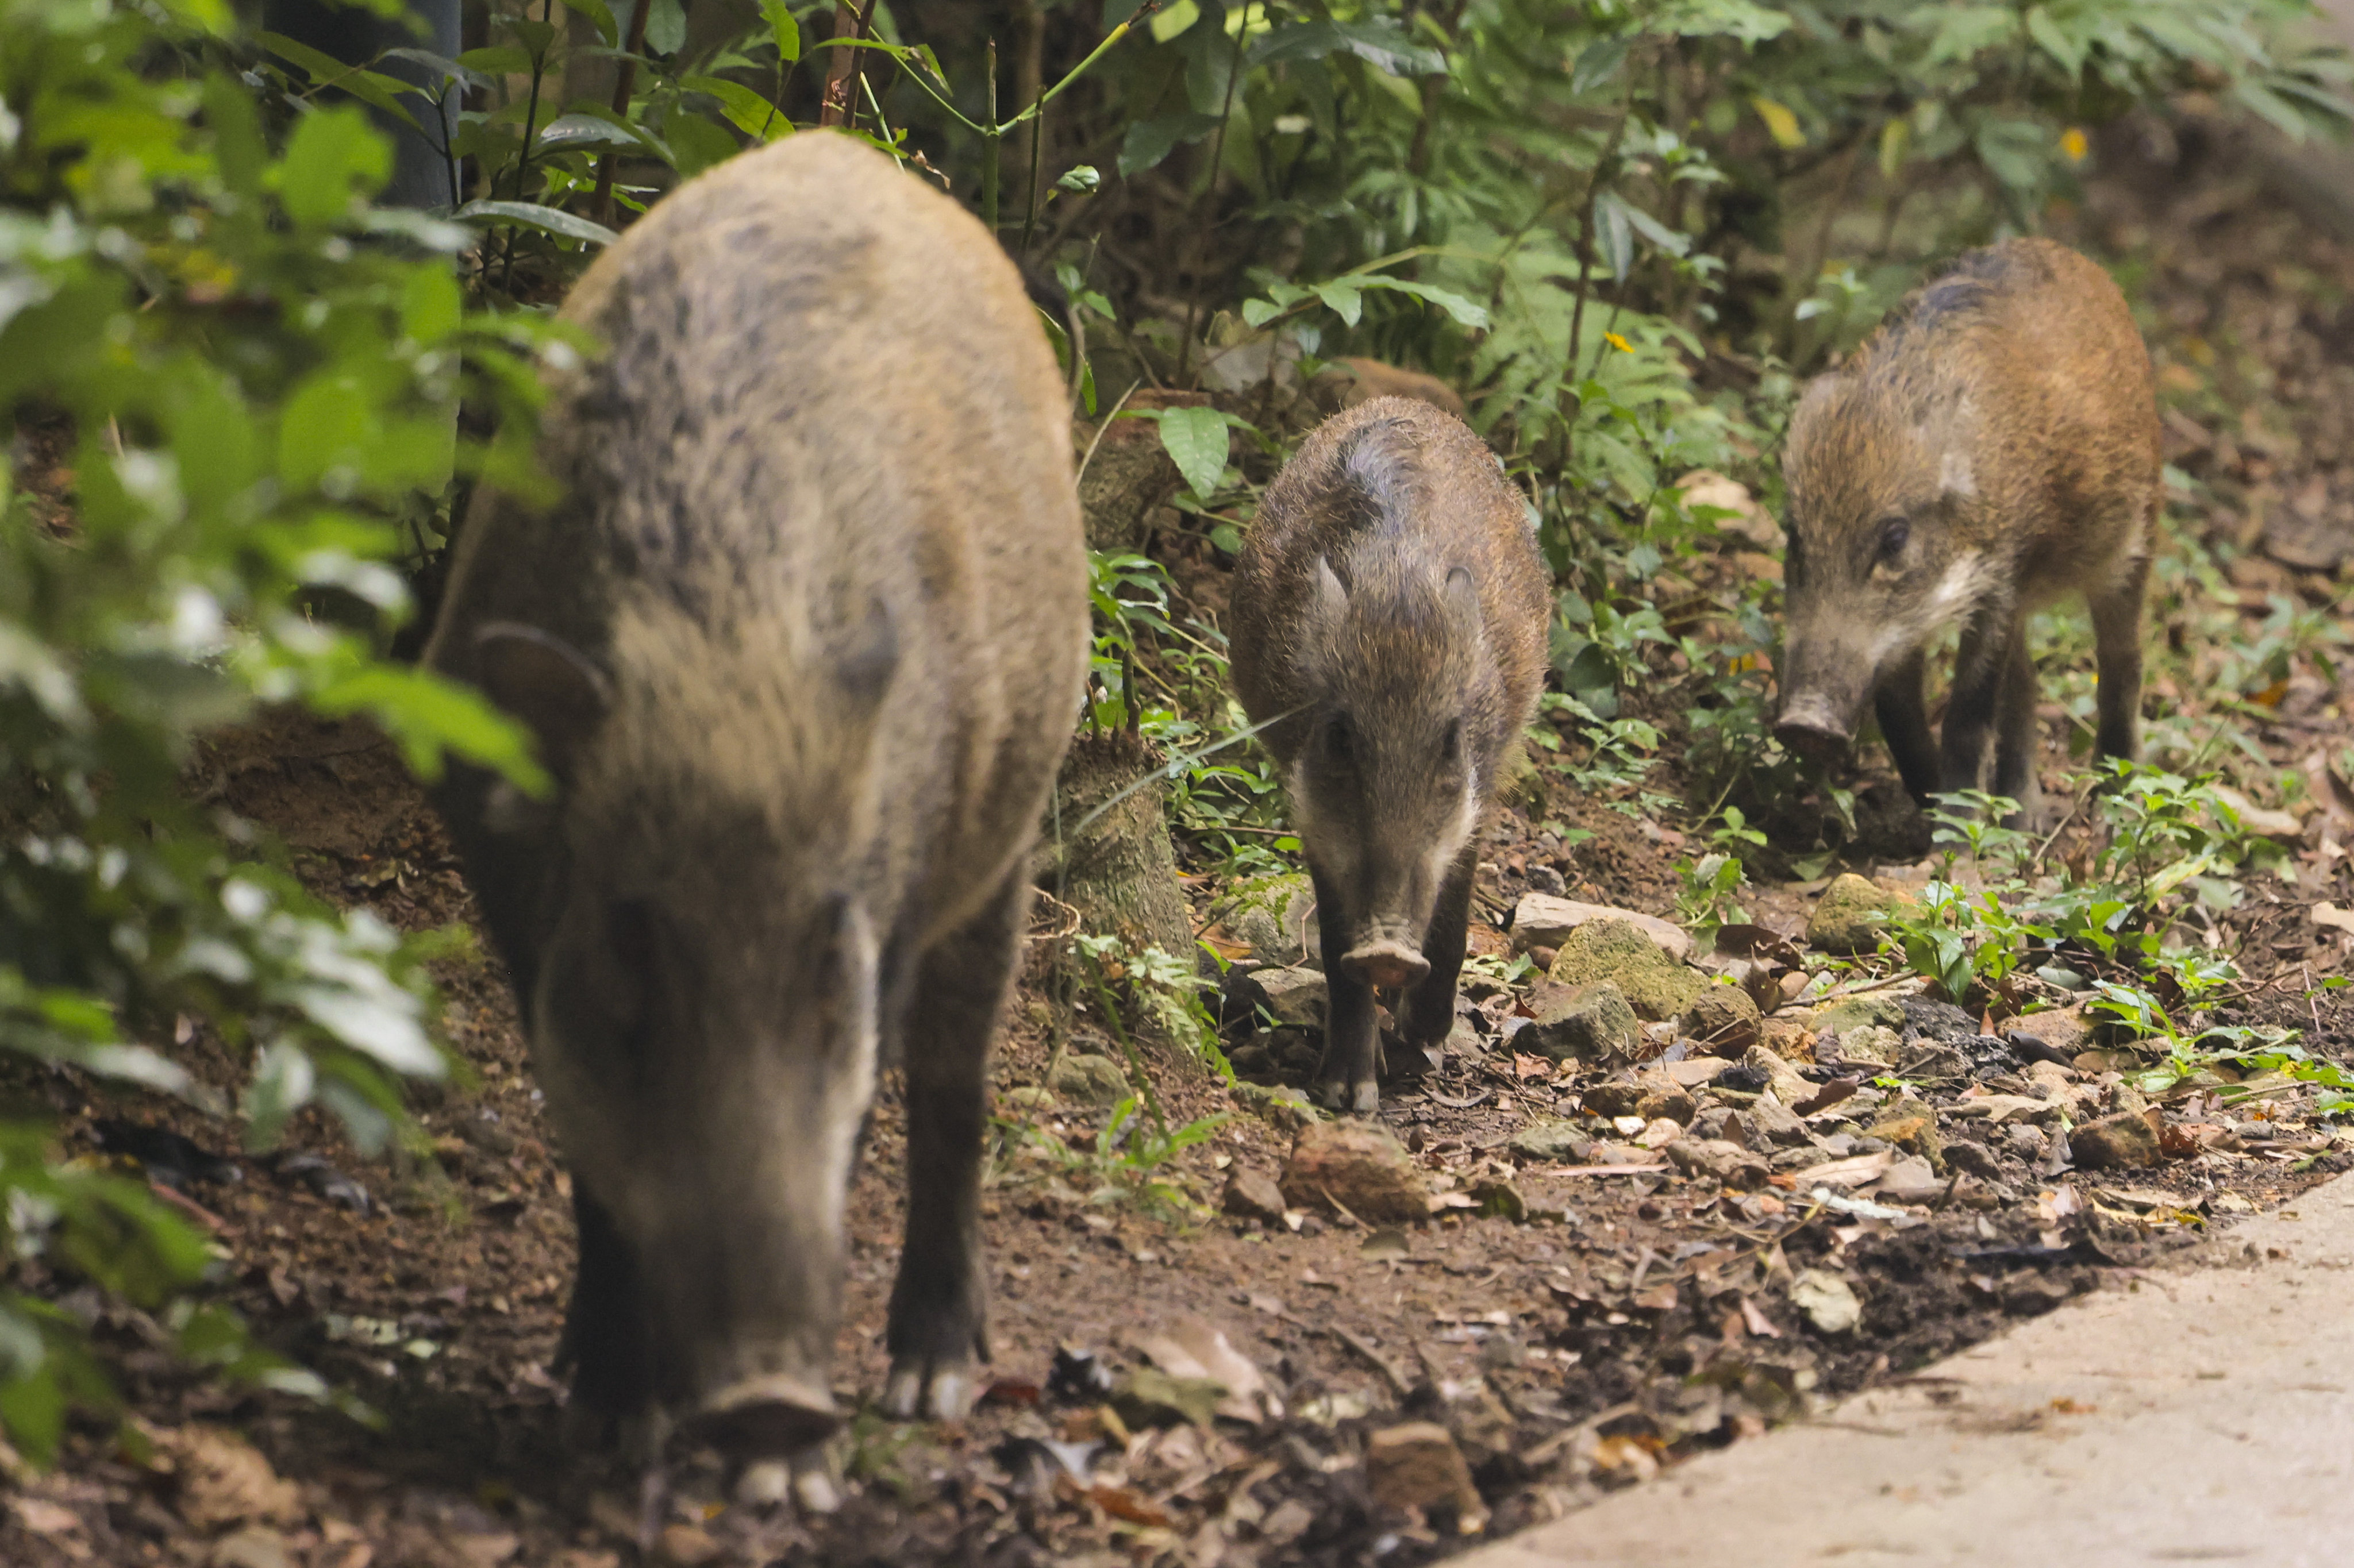 Experts warn wild boar sightings and nuisance reports in urban areas have not reduced significantly. Photo: Jelly Tse